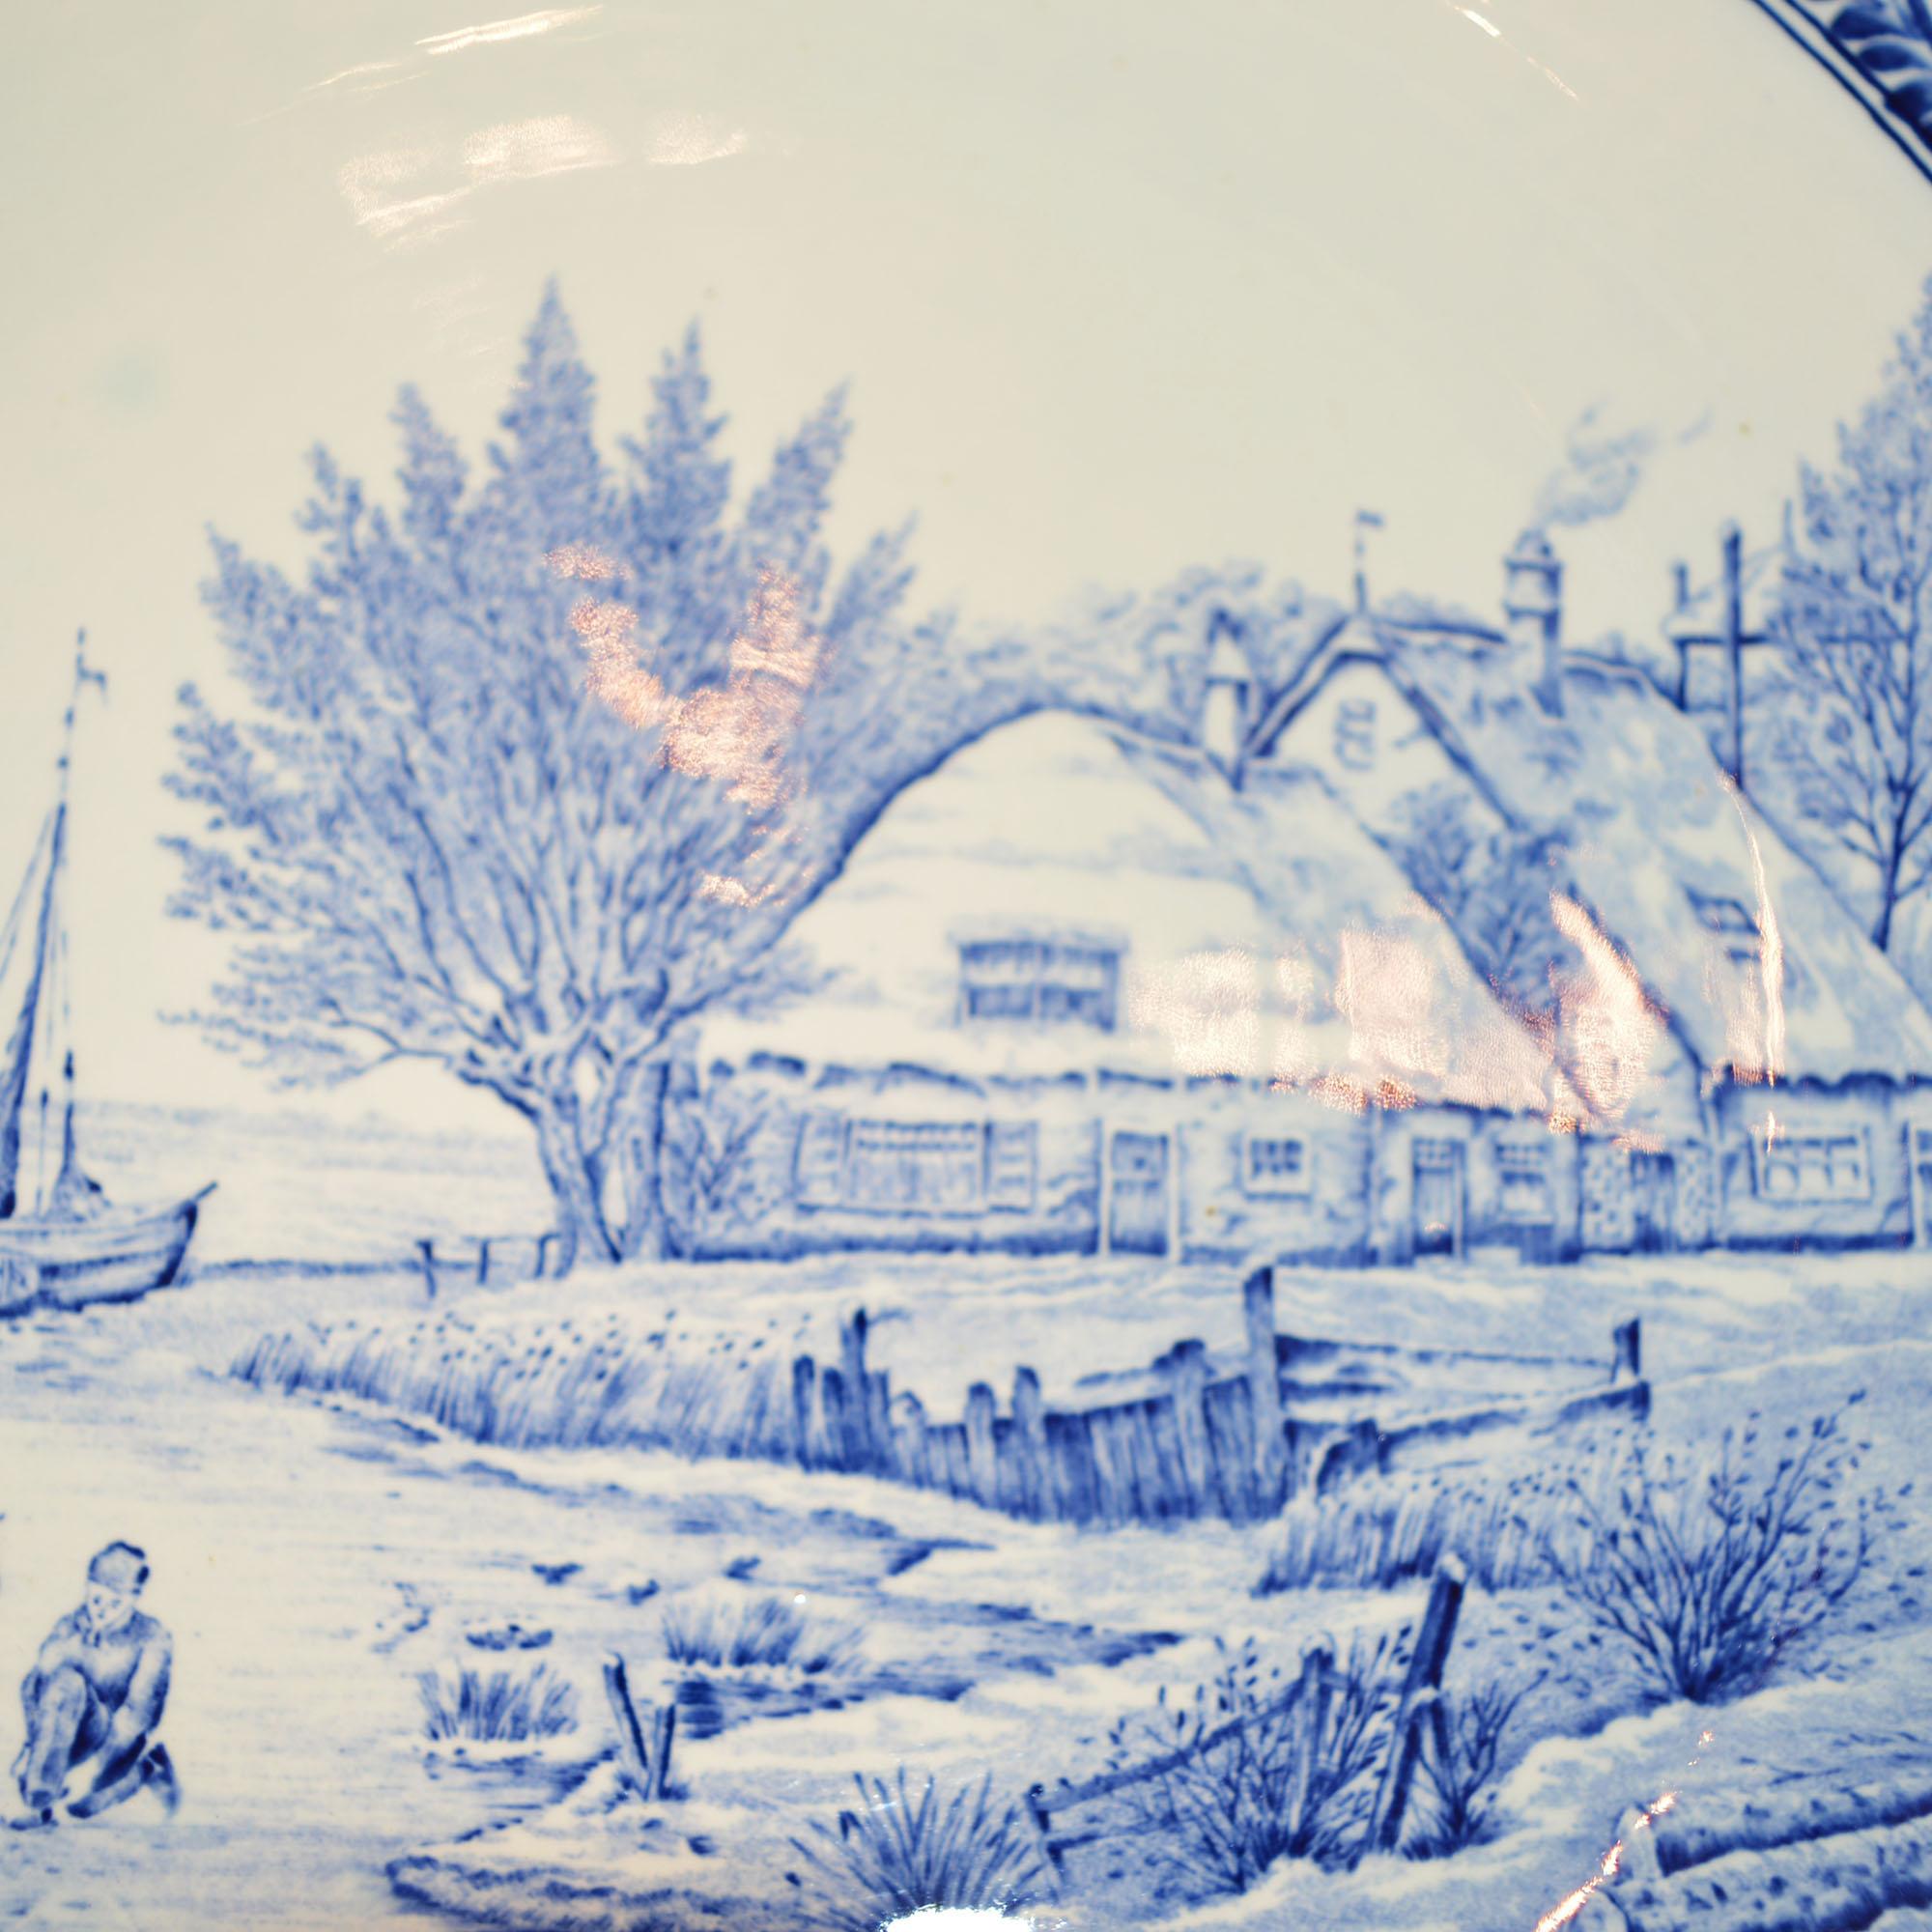 This large delft , blue and white charger/platter with intricately painted scene was made in Holland. The large wall hanging plate depicts a winding, frozen stream with a traditional Dutch windmill in the Classic blue and white palette. The scene